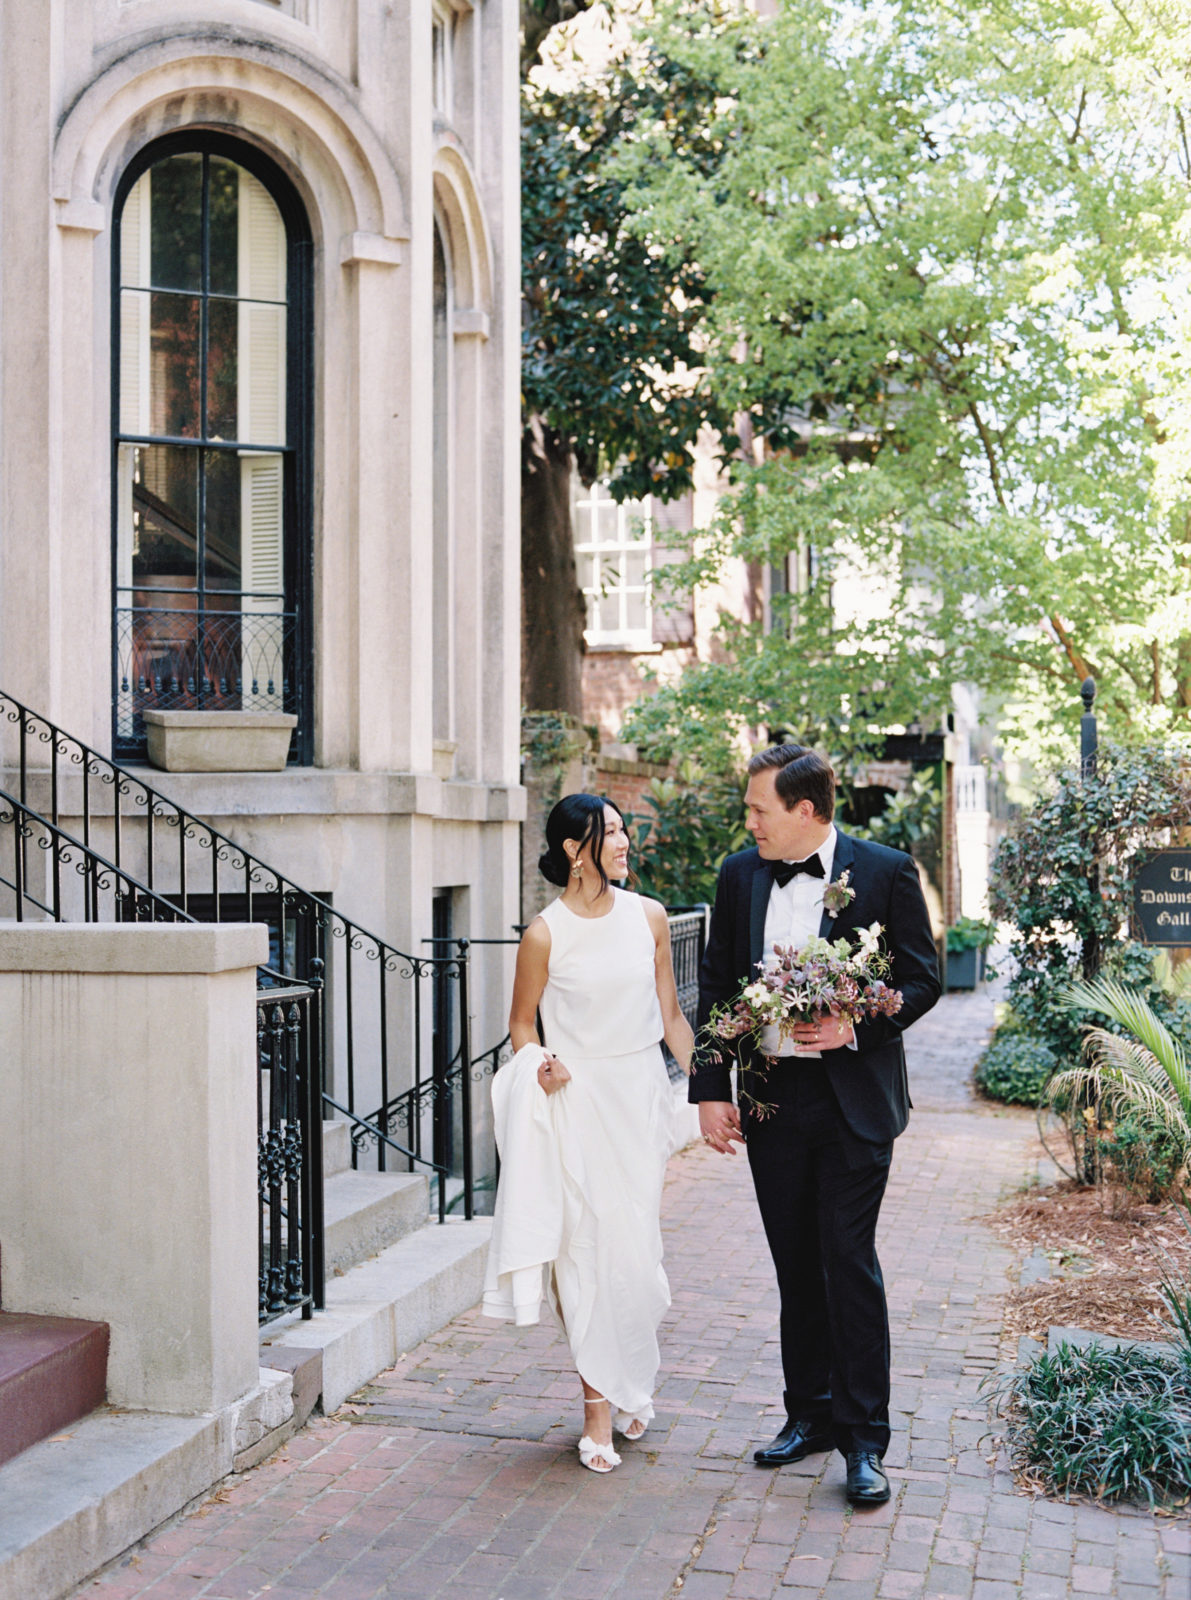 Couple goes for a walk in the streets of Savannah during their old world-inspired elopement. Brides hold train of her modern gown while groom holds bouquet.